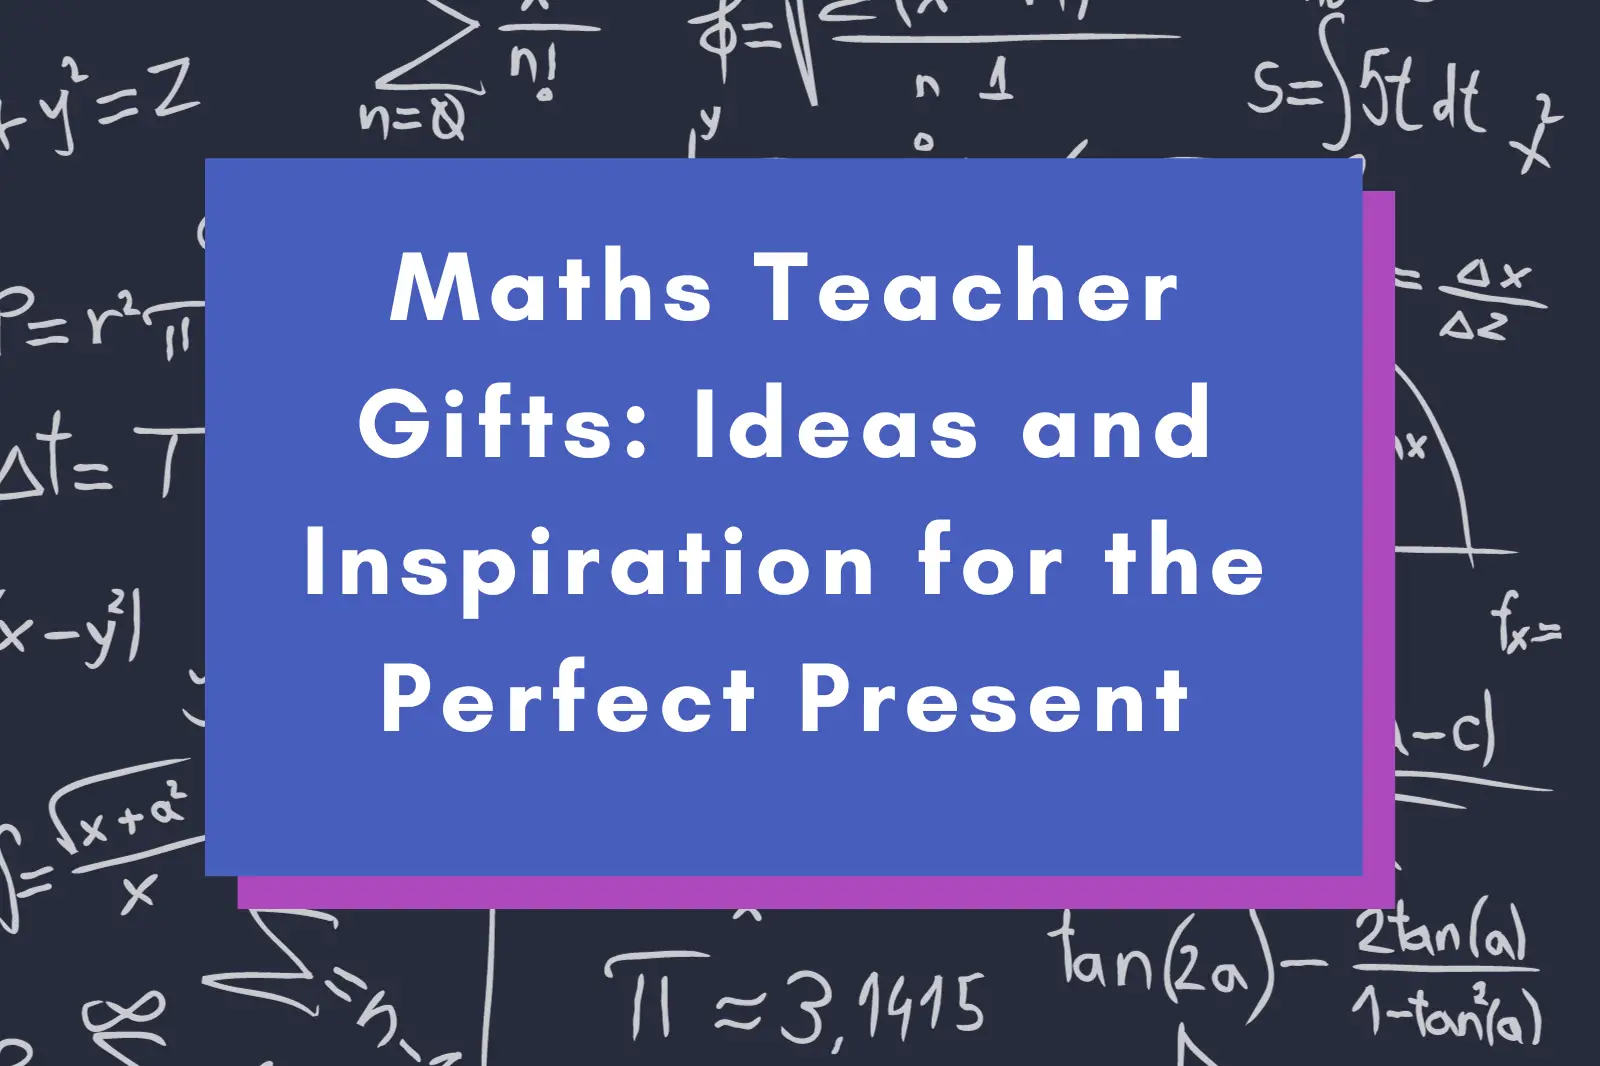 Maths Teacher Gifts: Ideas and Inspiration for the Perfect Present